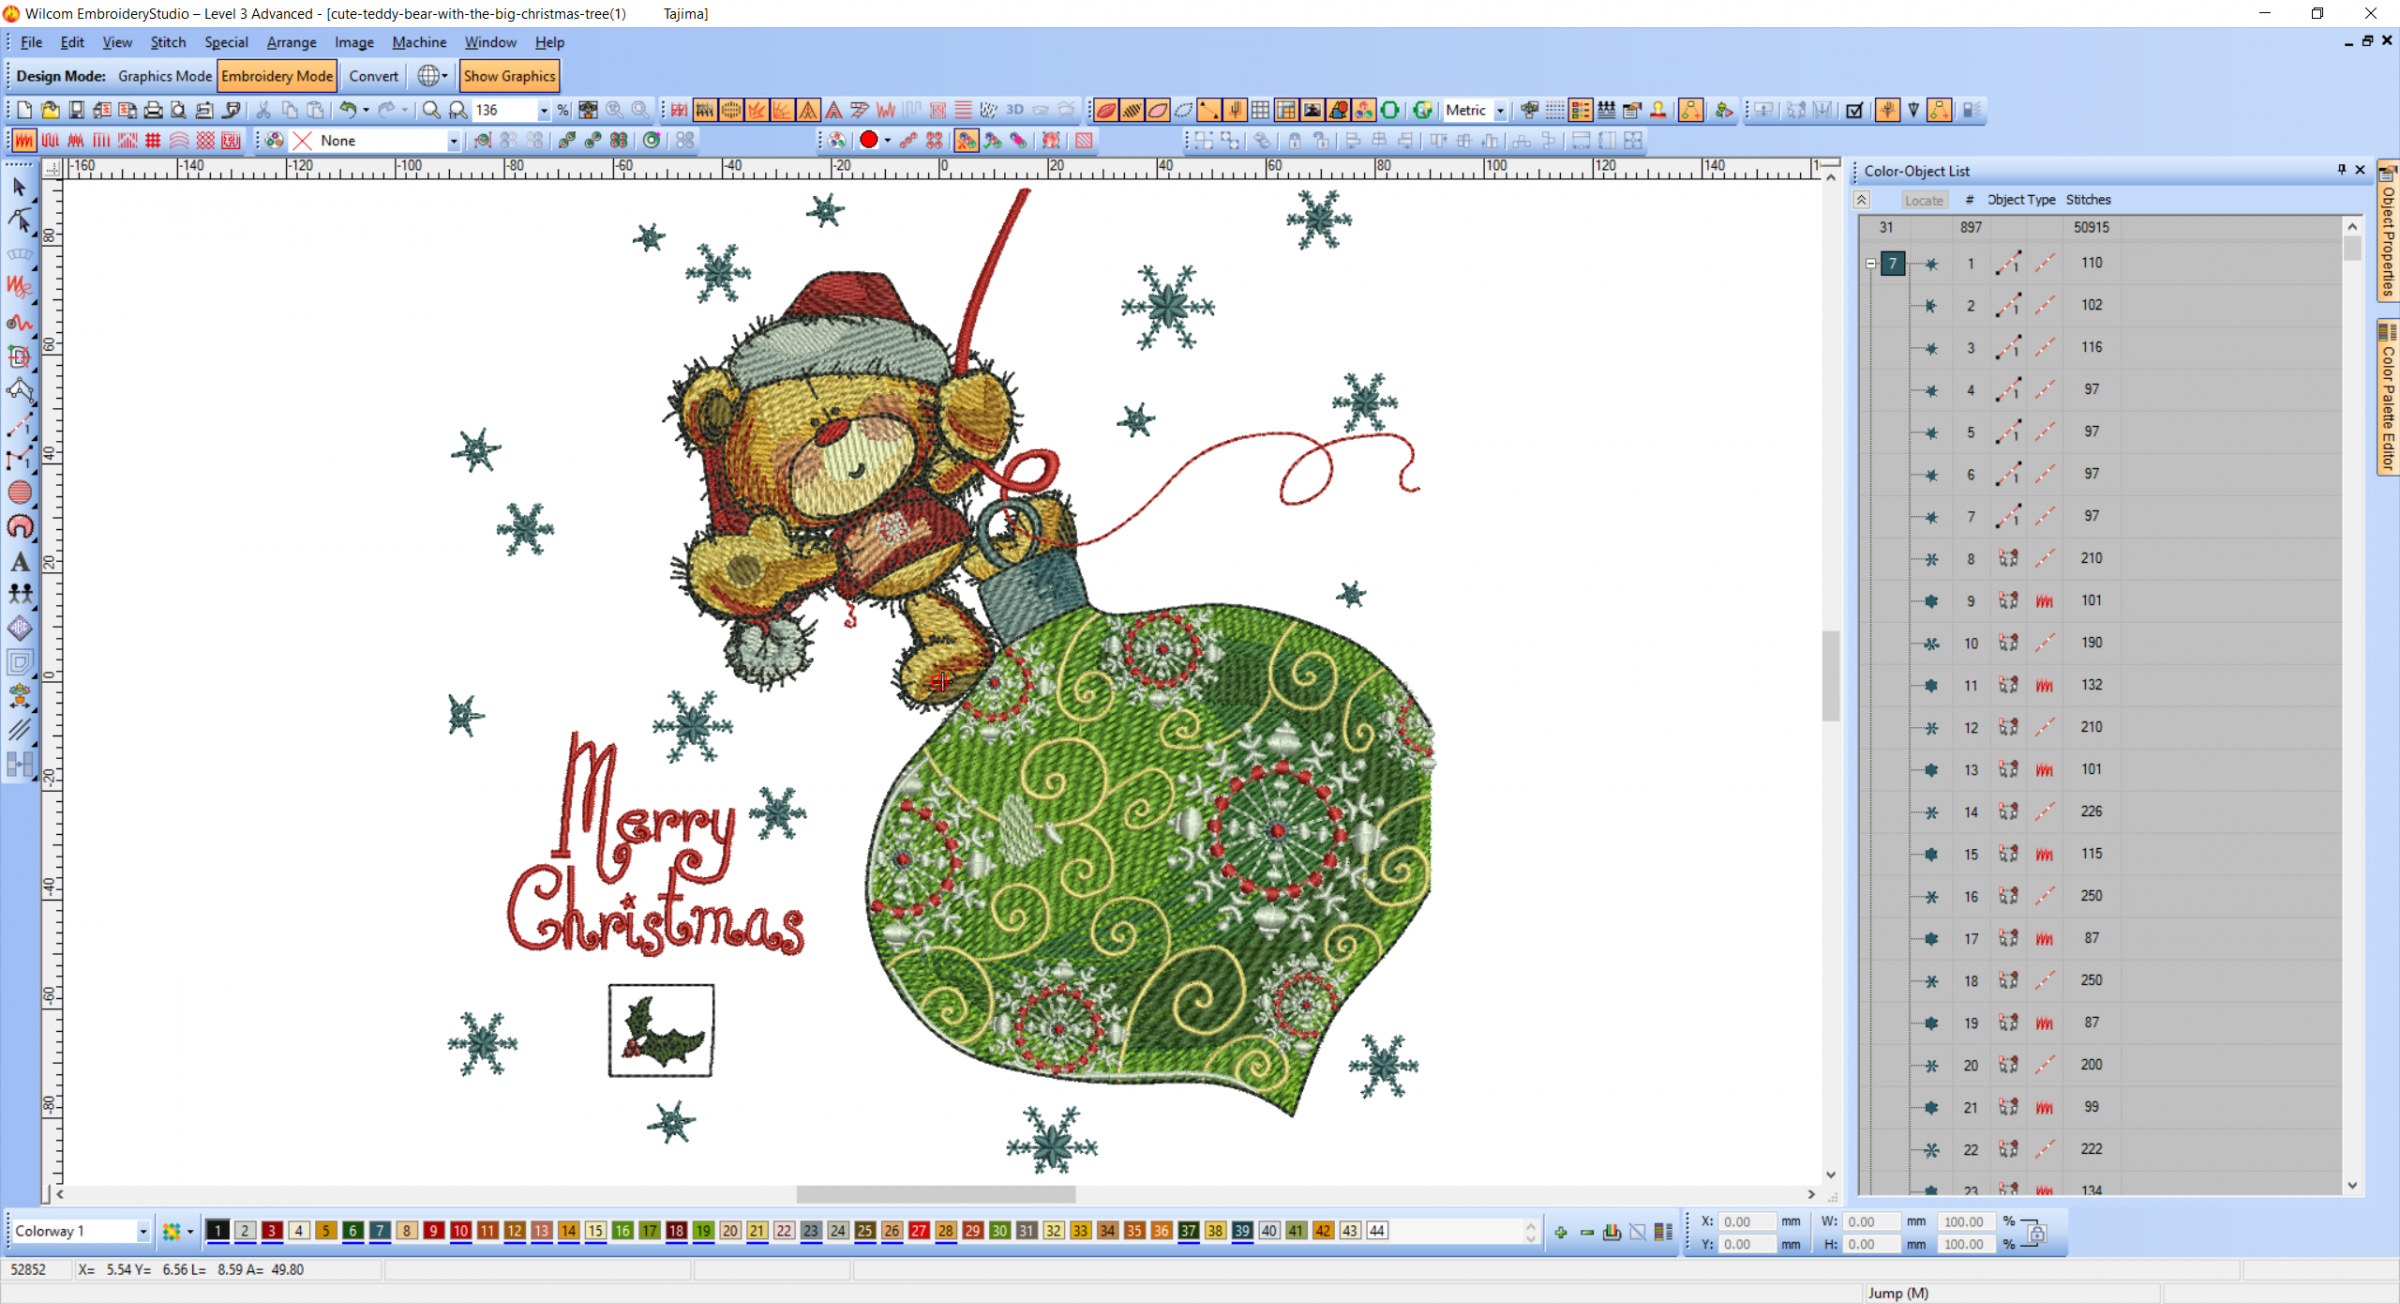 Teddy Bear Christmas time embroidery design preview in software